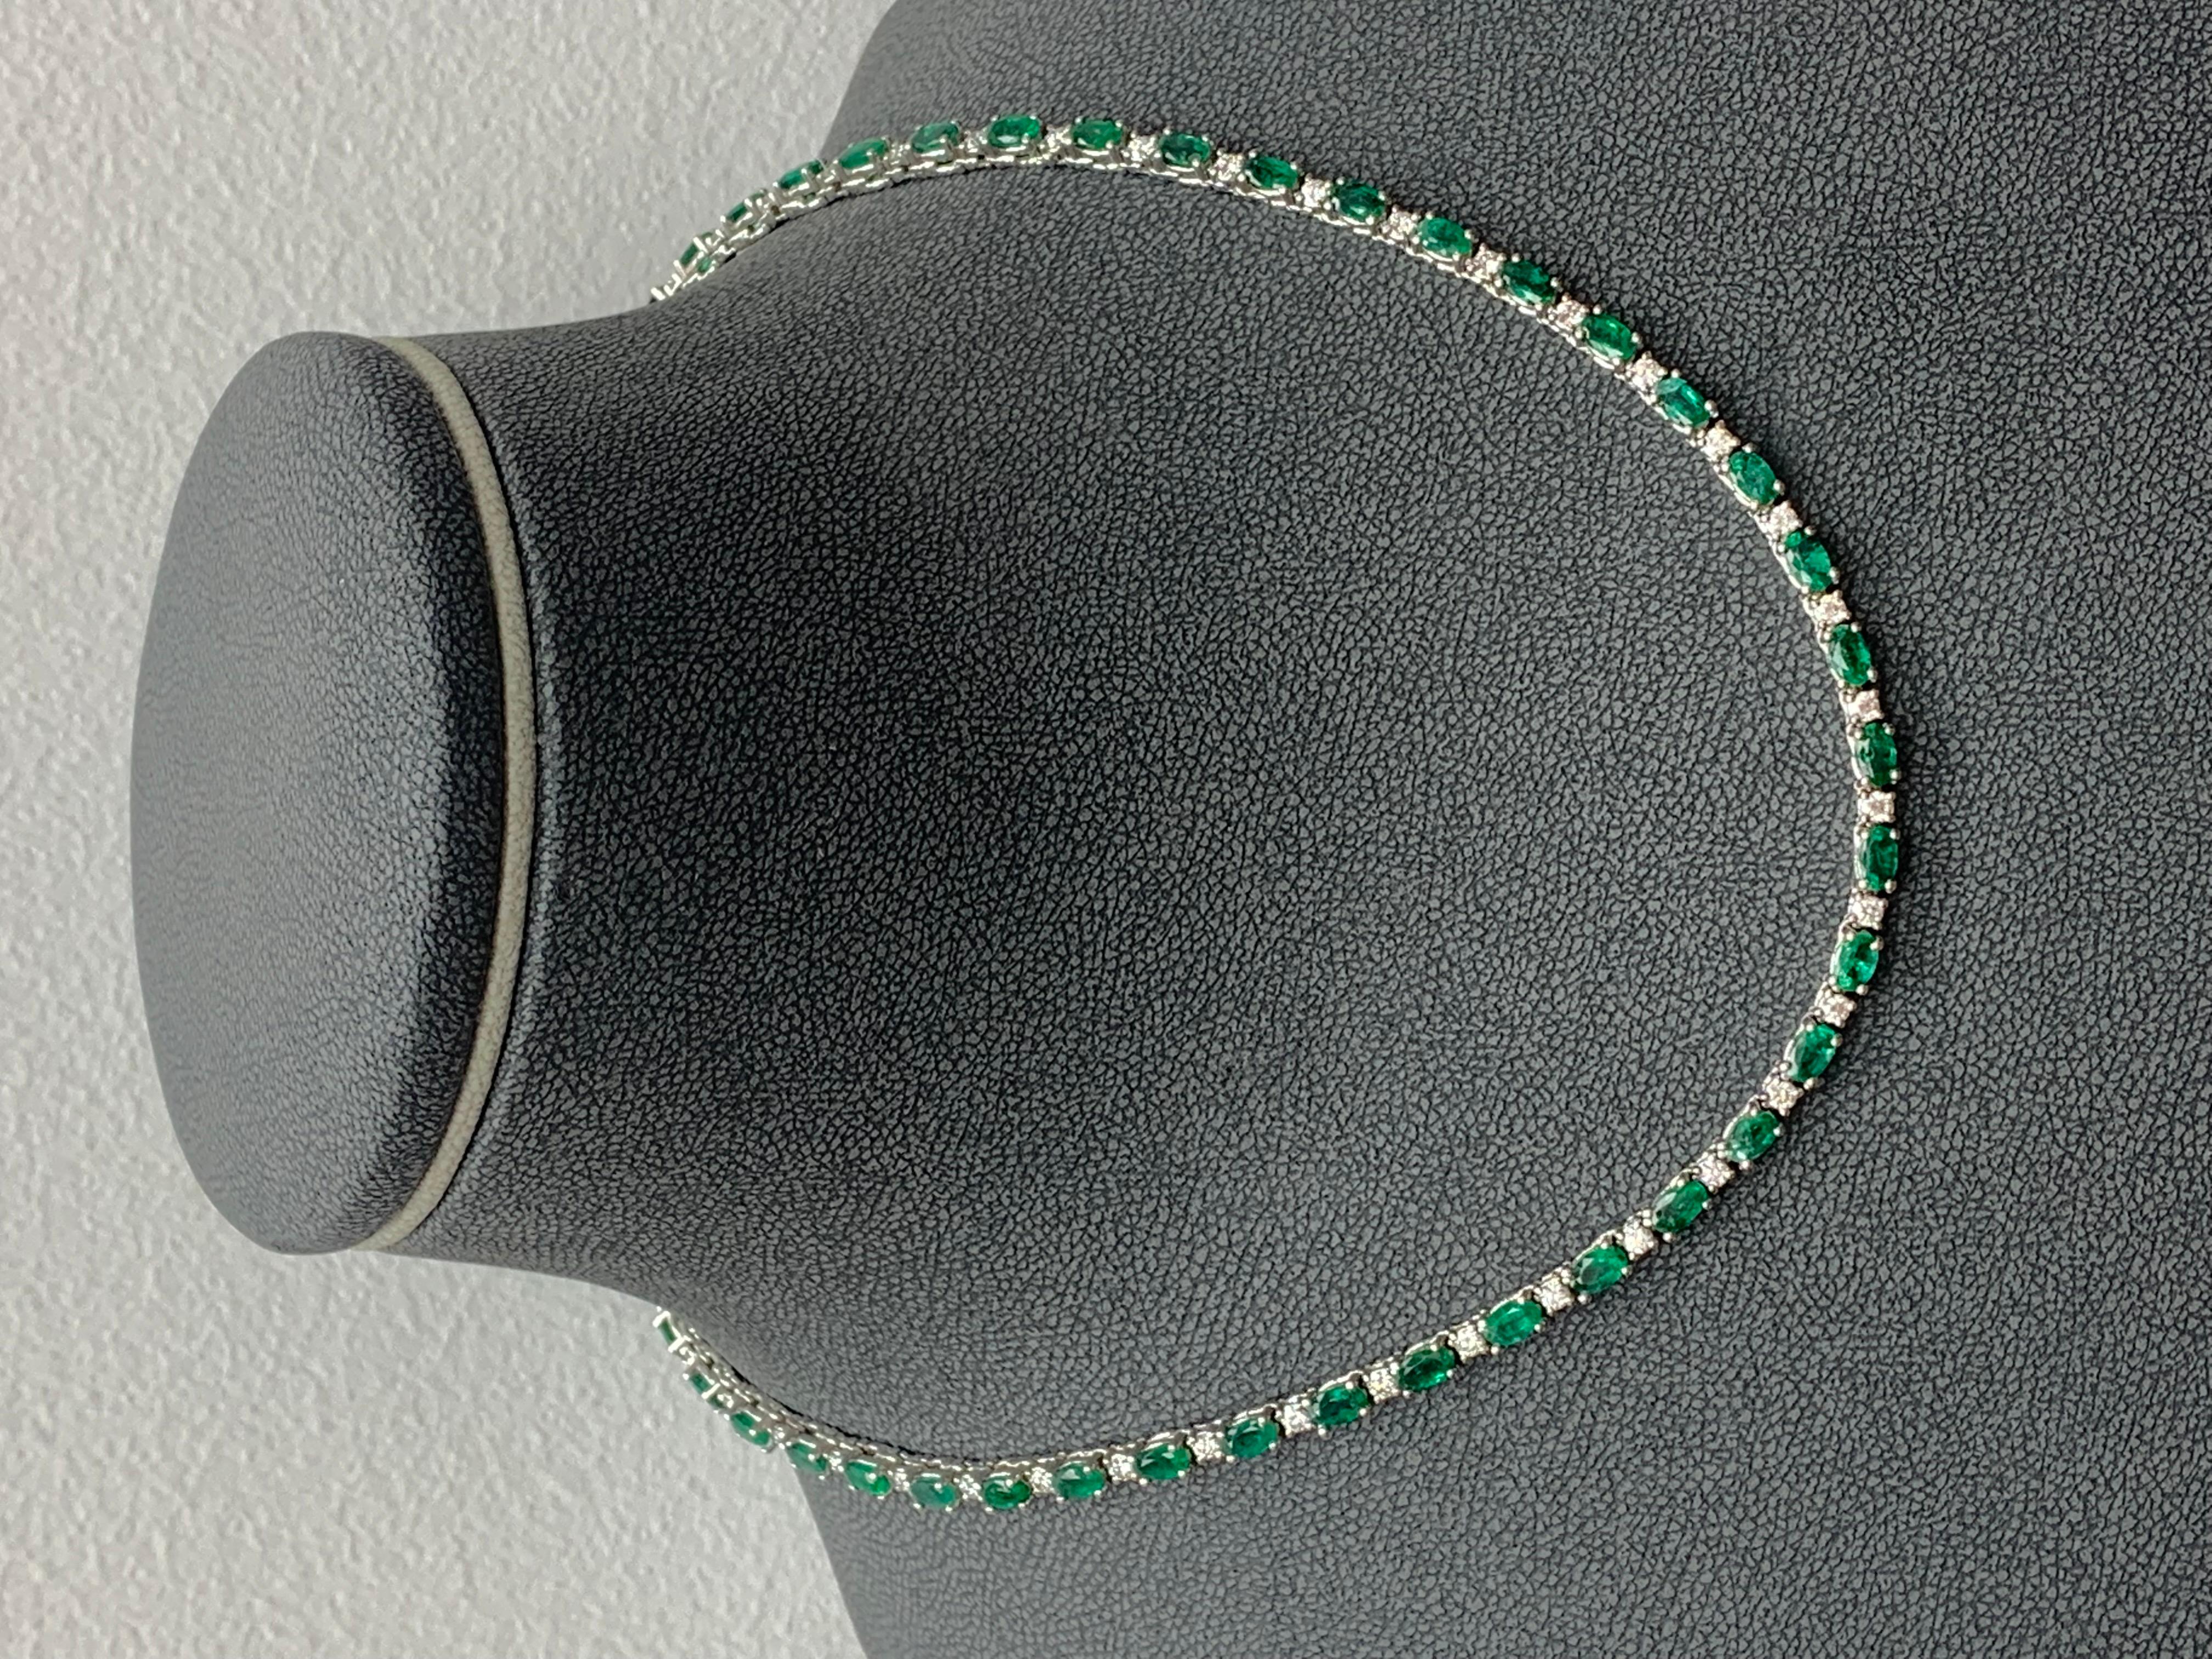 An incredibly color-rich tennis necklace showcasing 11.52 carats of 51 oval-cut lush green emeralds, each elegantly spaced by 51 round brilliant diamonds weighing 2.54 carats total. Made in 14k white gold. Approximately 16 inches in length & can be